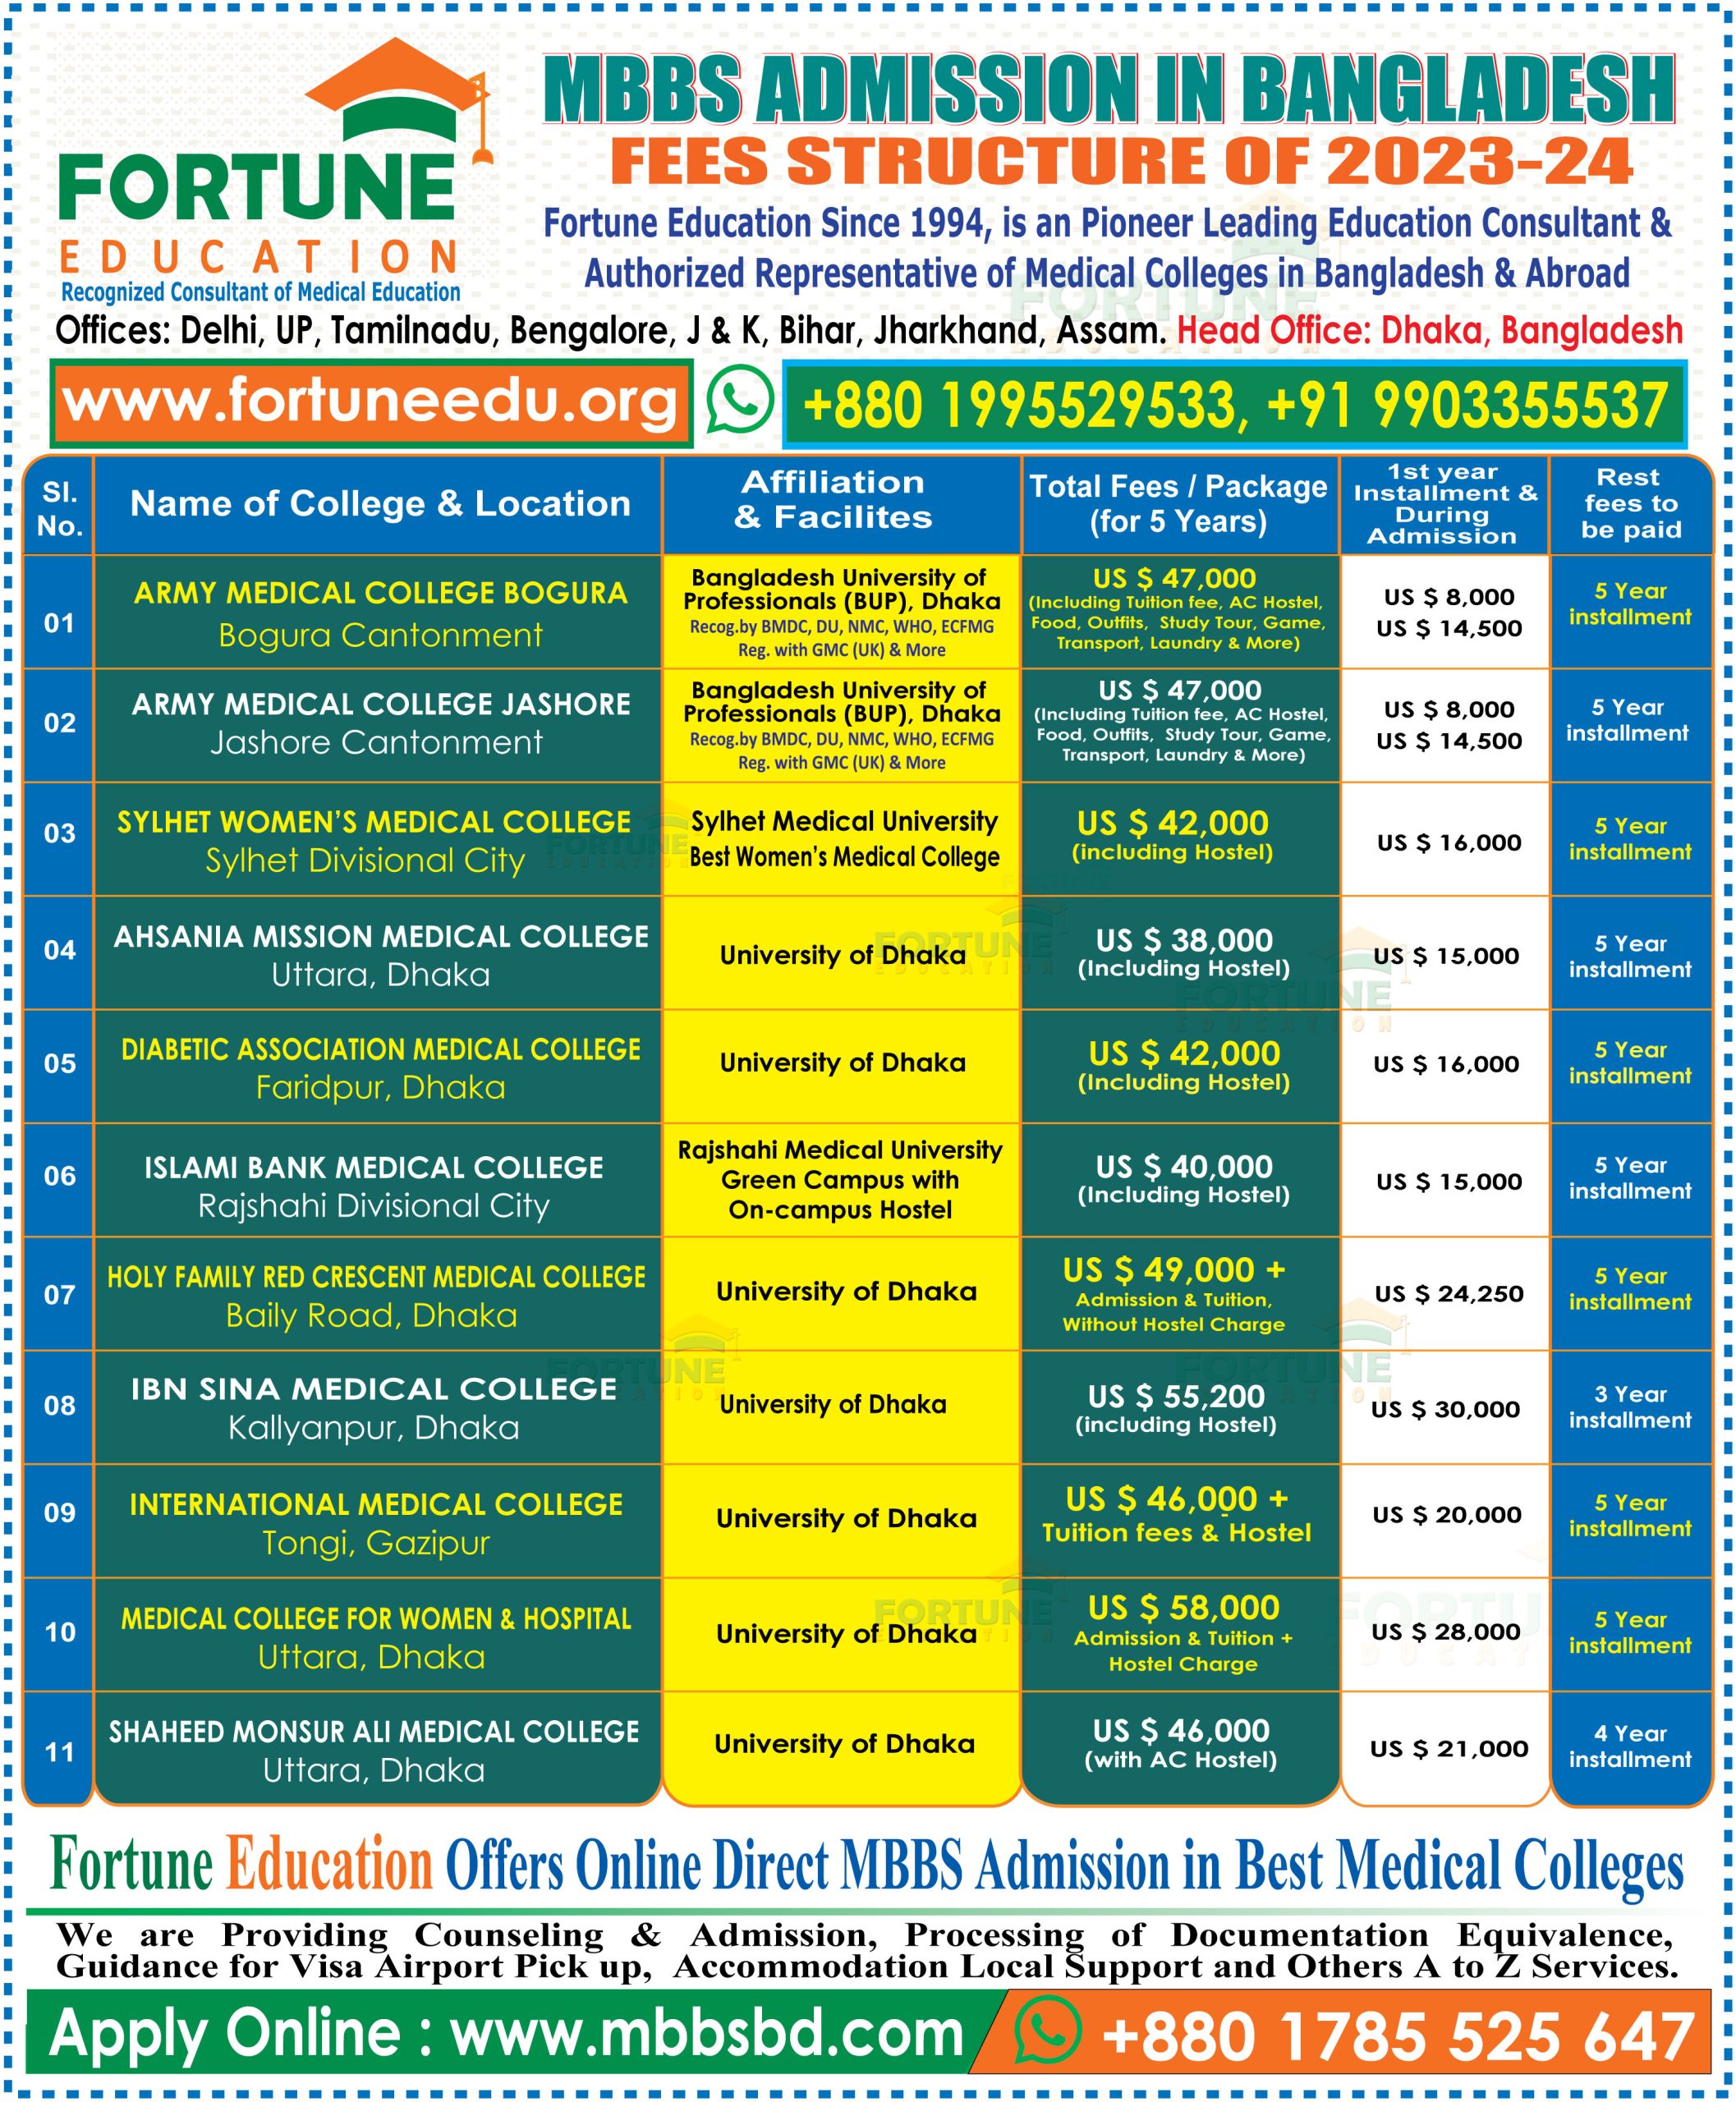 Comparative MBBS Fee Structure